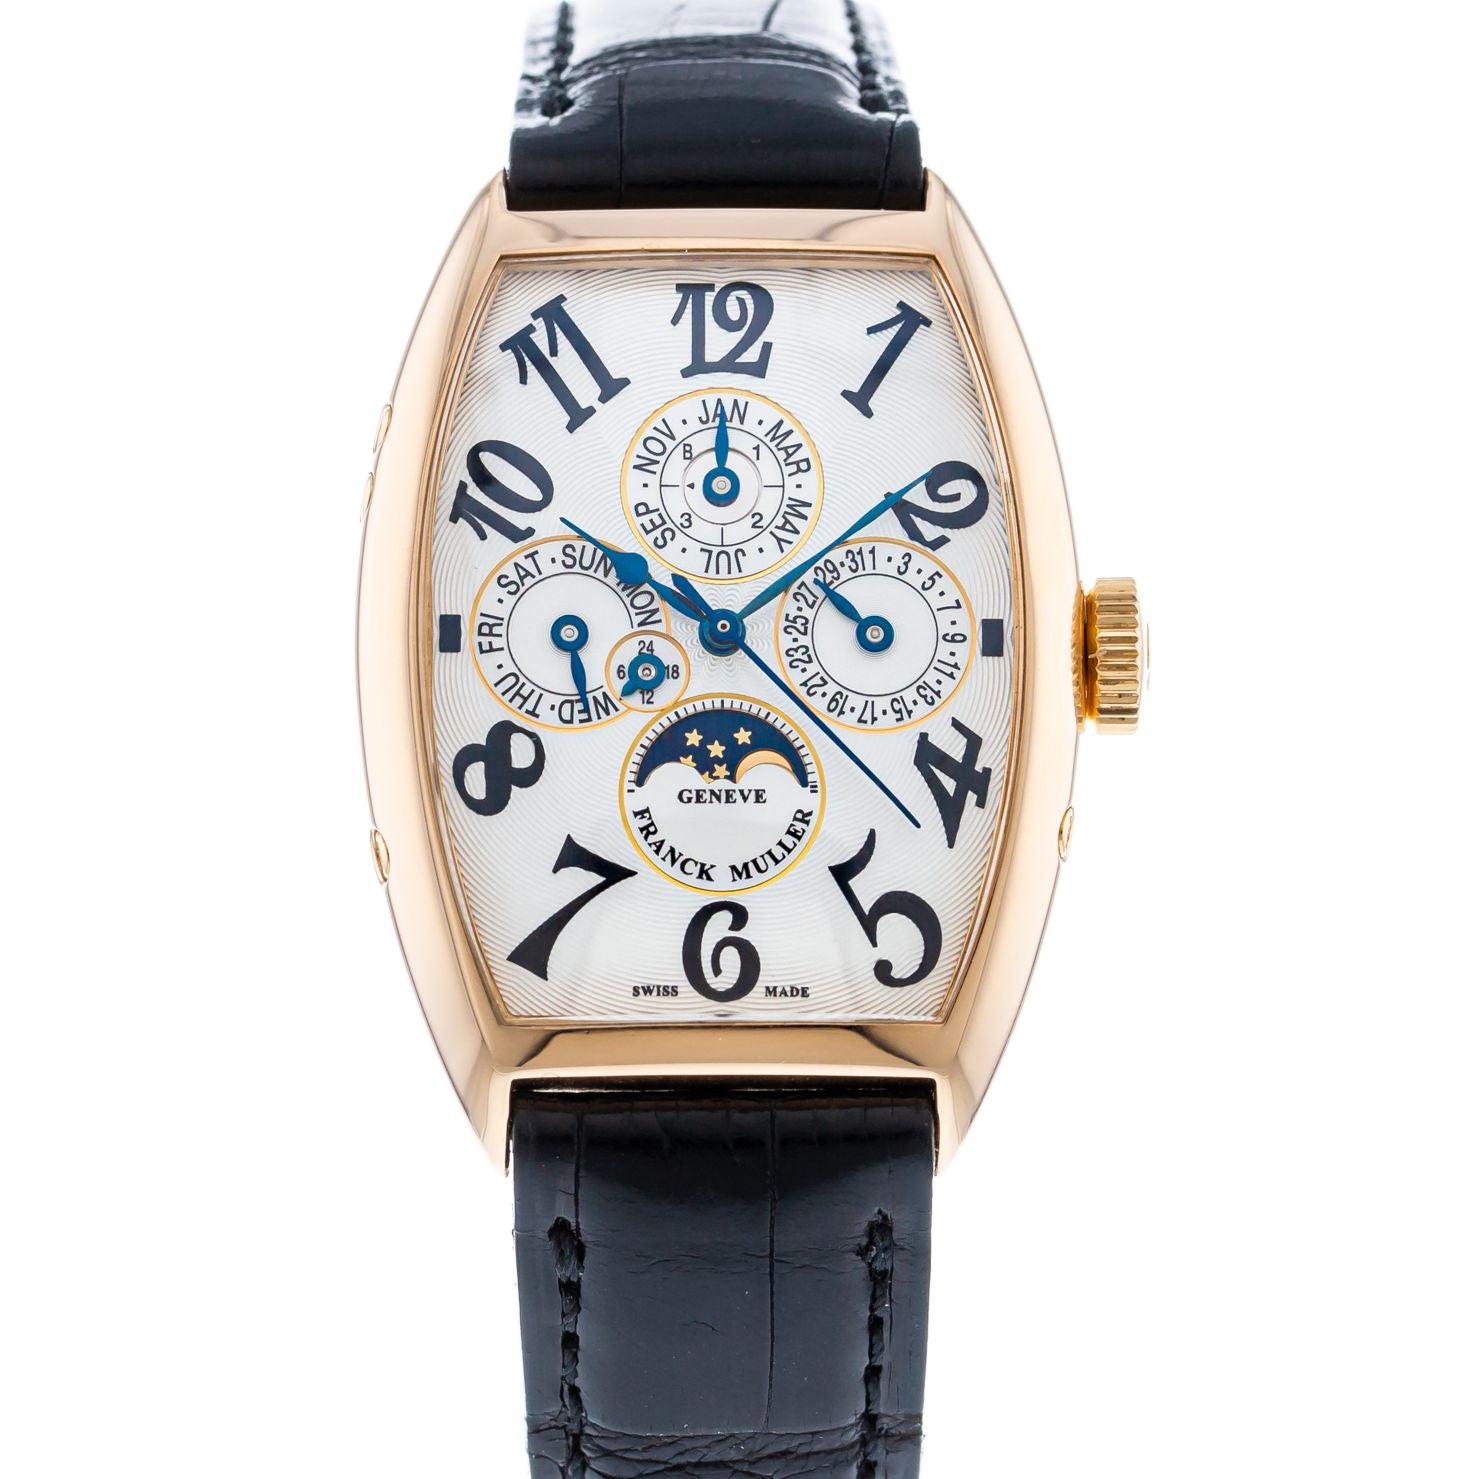 Franck Muller: 159 watches with prices – The Watch Pages